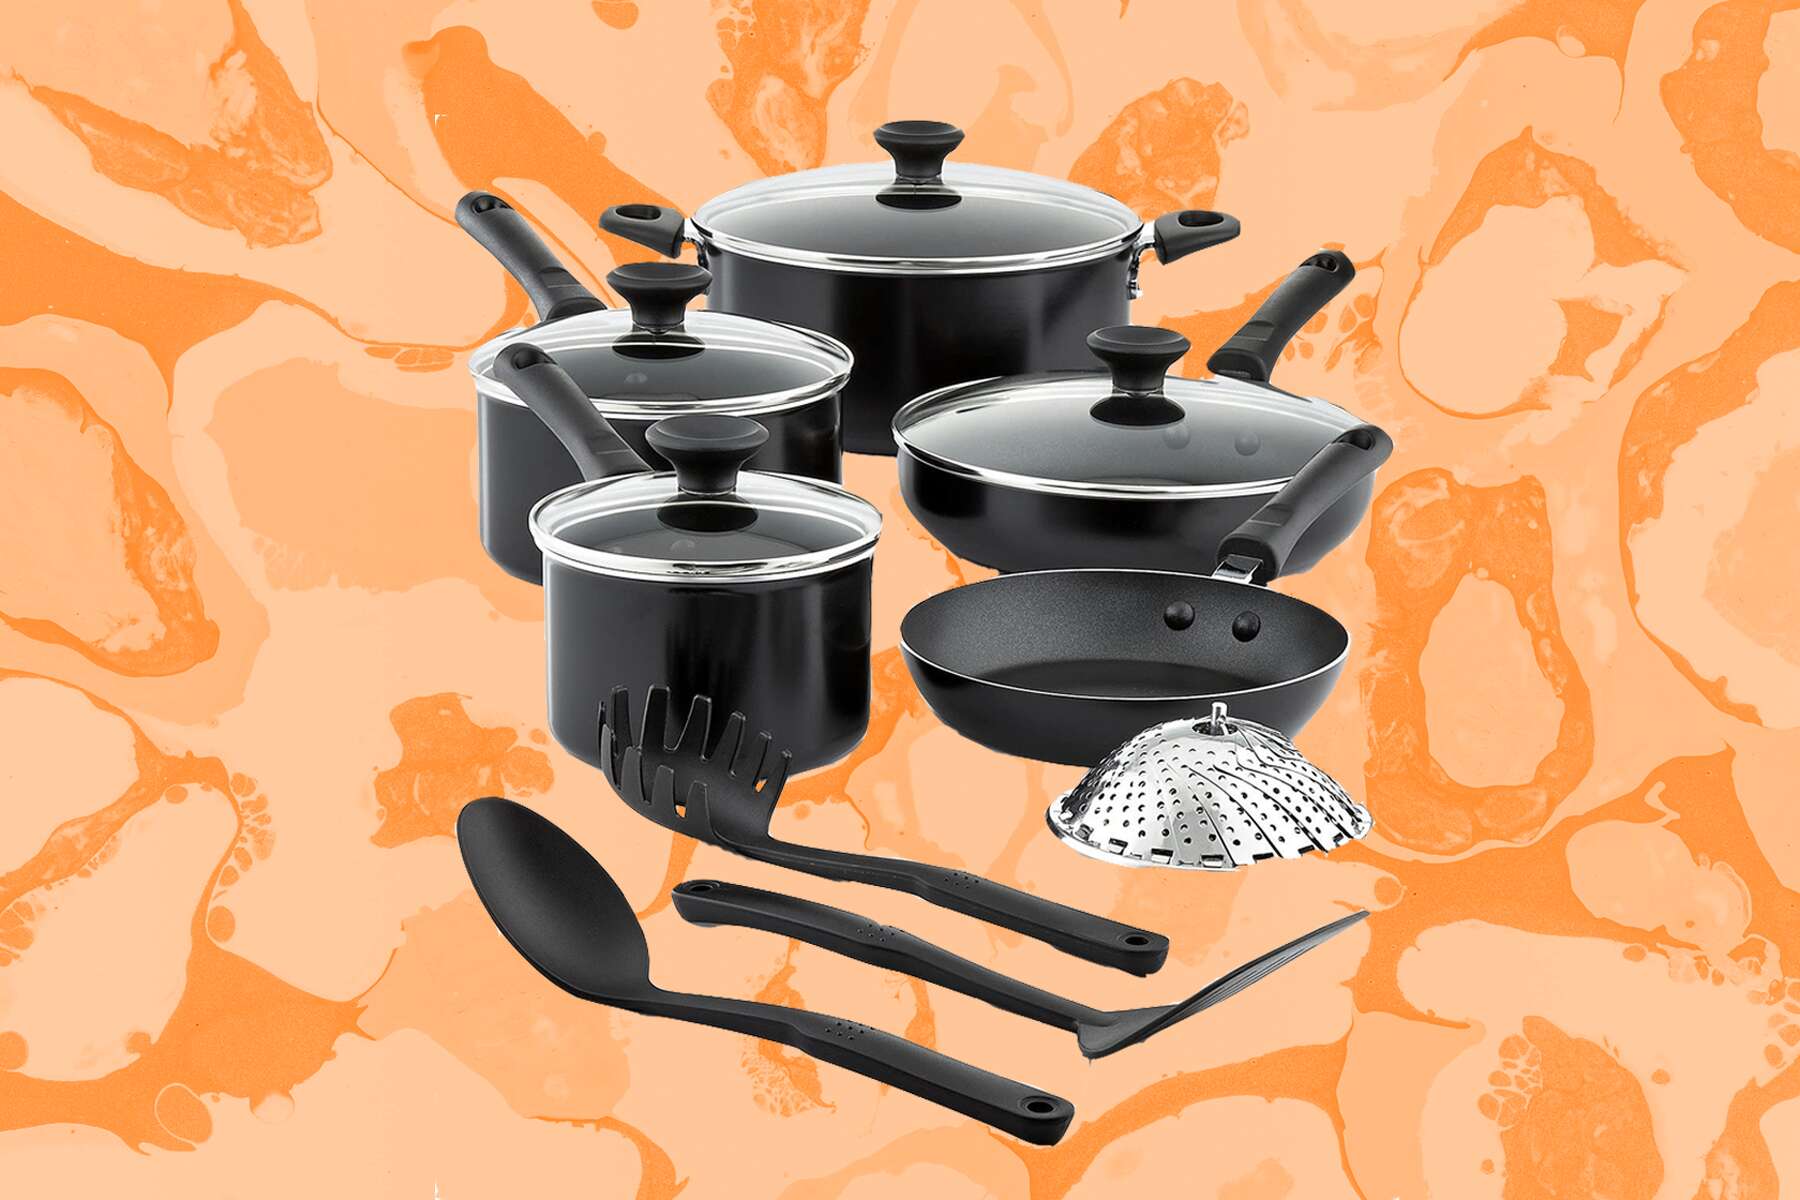 Macy's has cookware sets on sale